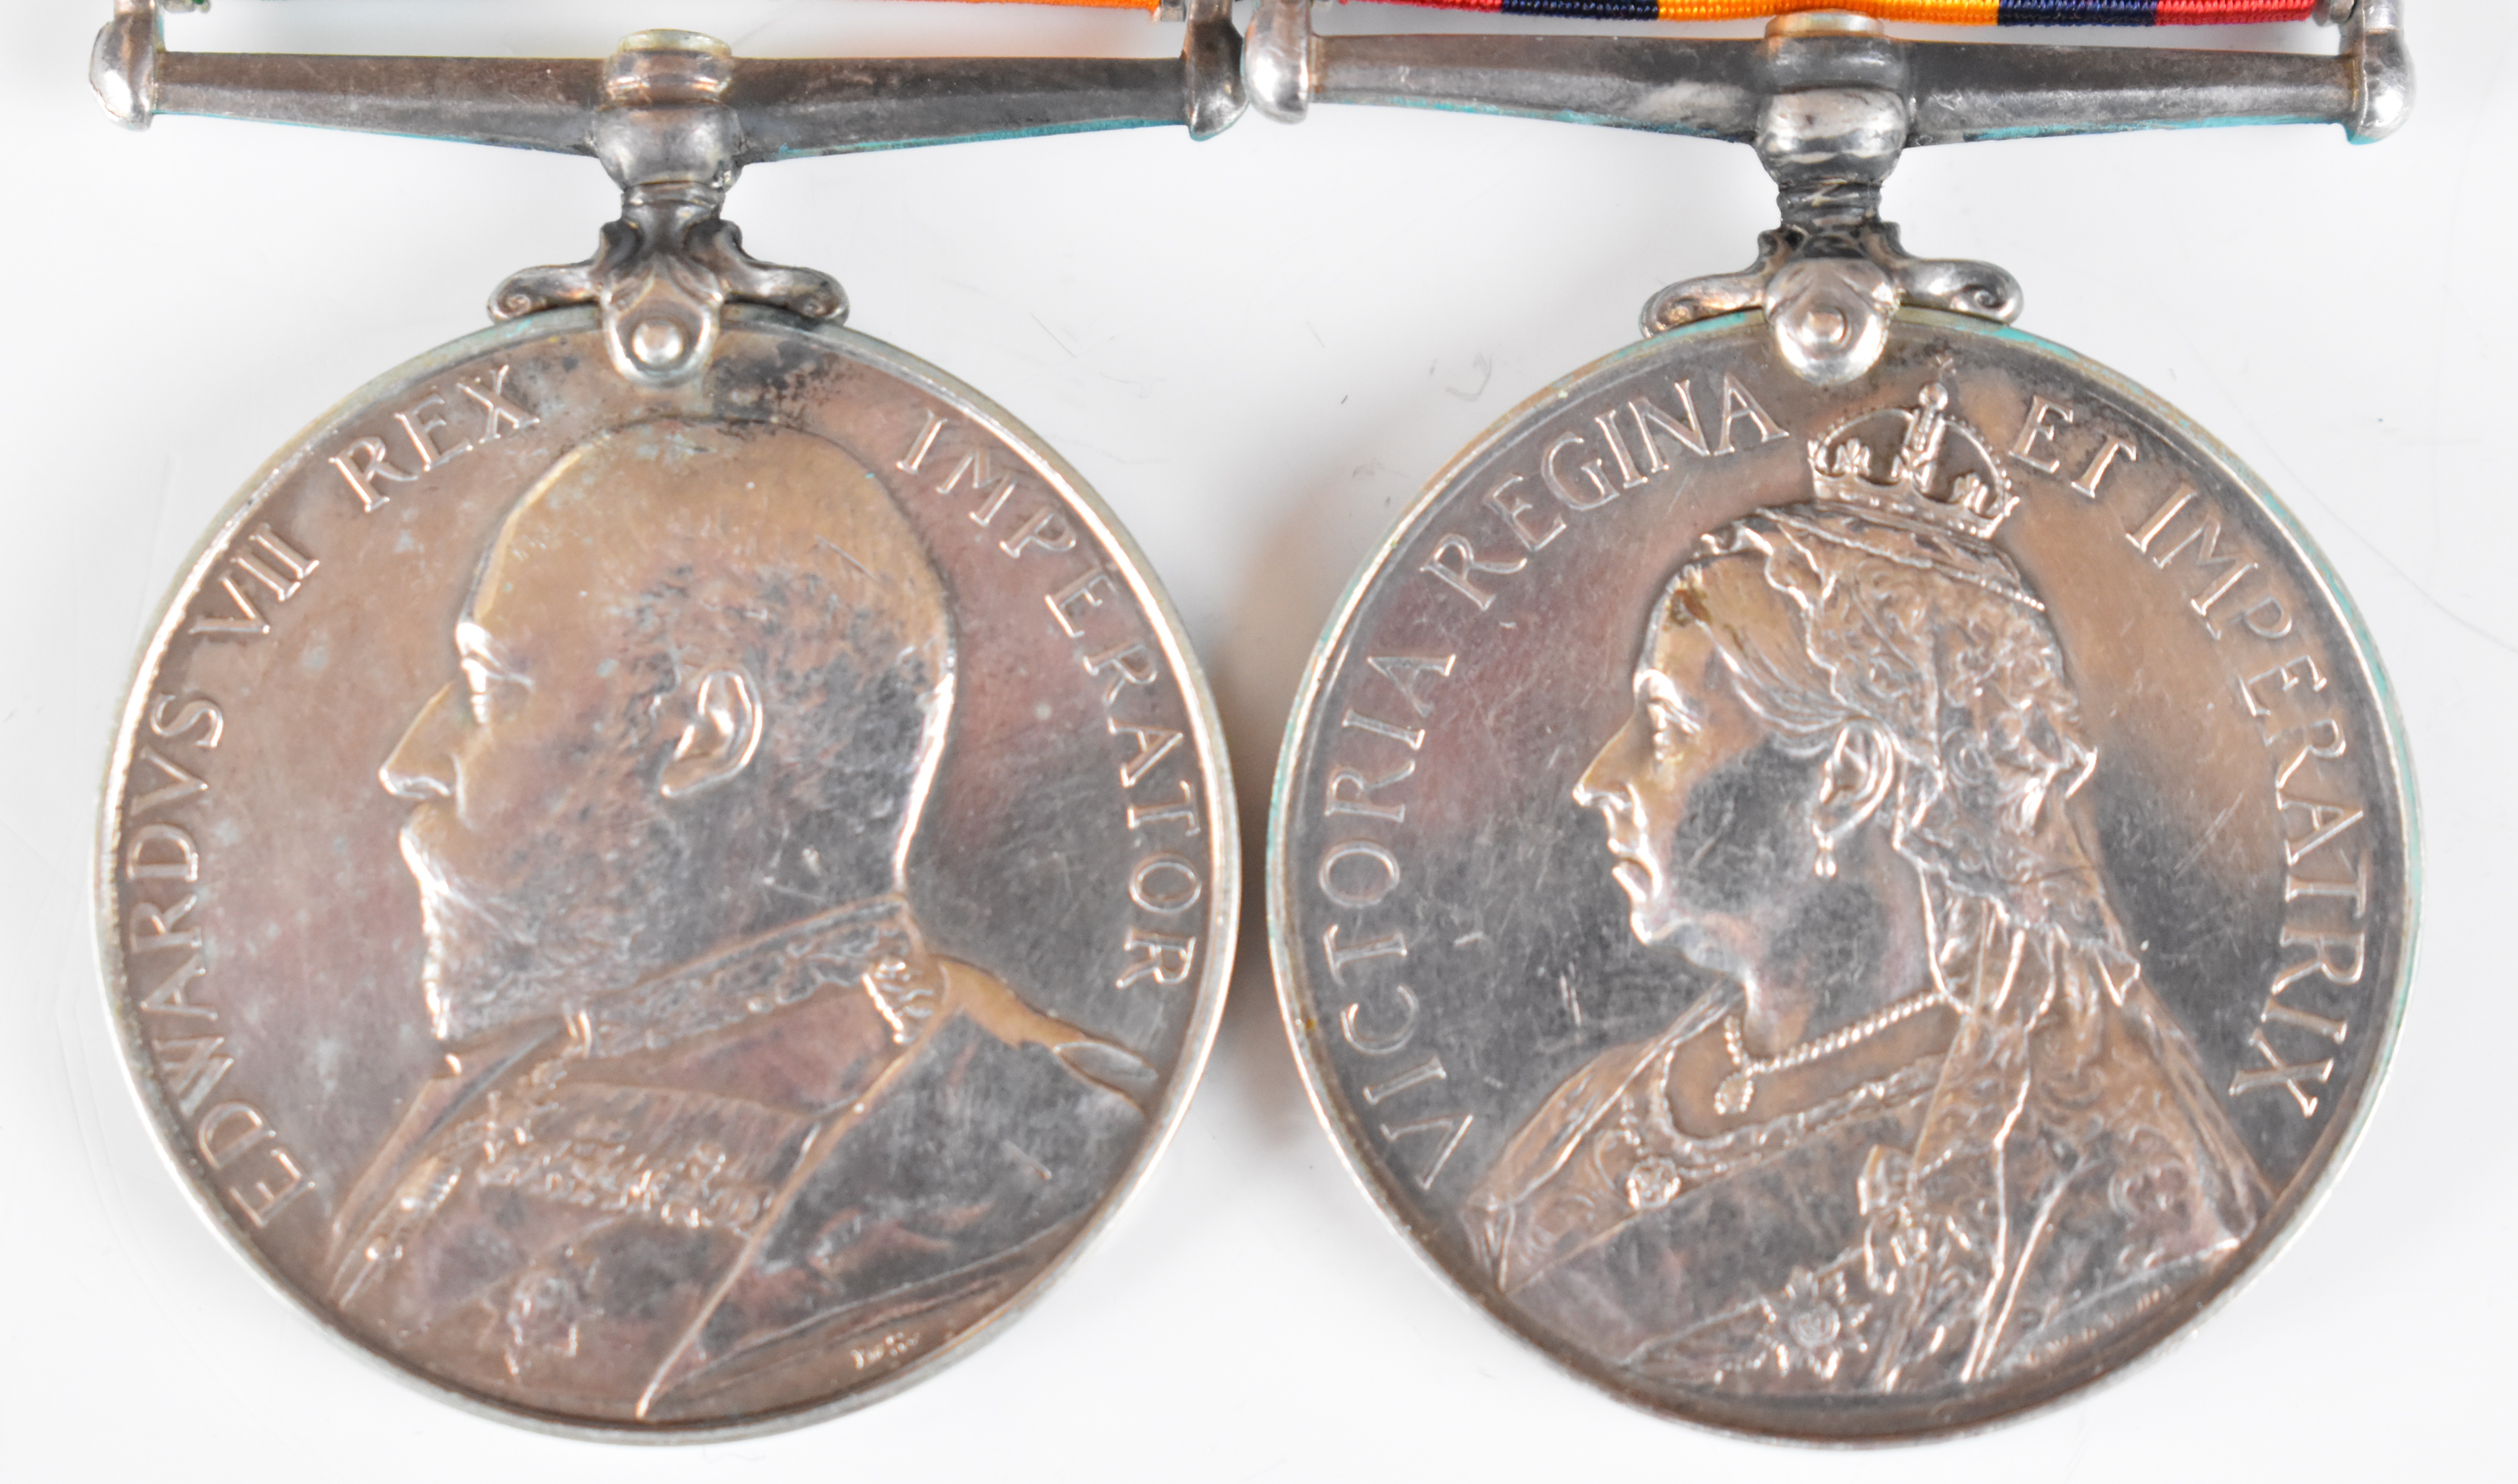 Queen's South Africa Medal with eight clasps for Belmont, Modder River, Relief of Kimberley, - Image 7 of 20